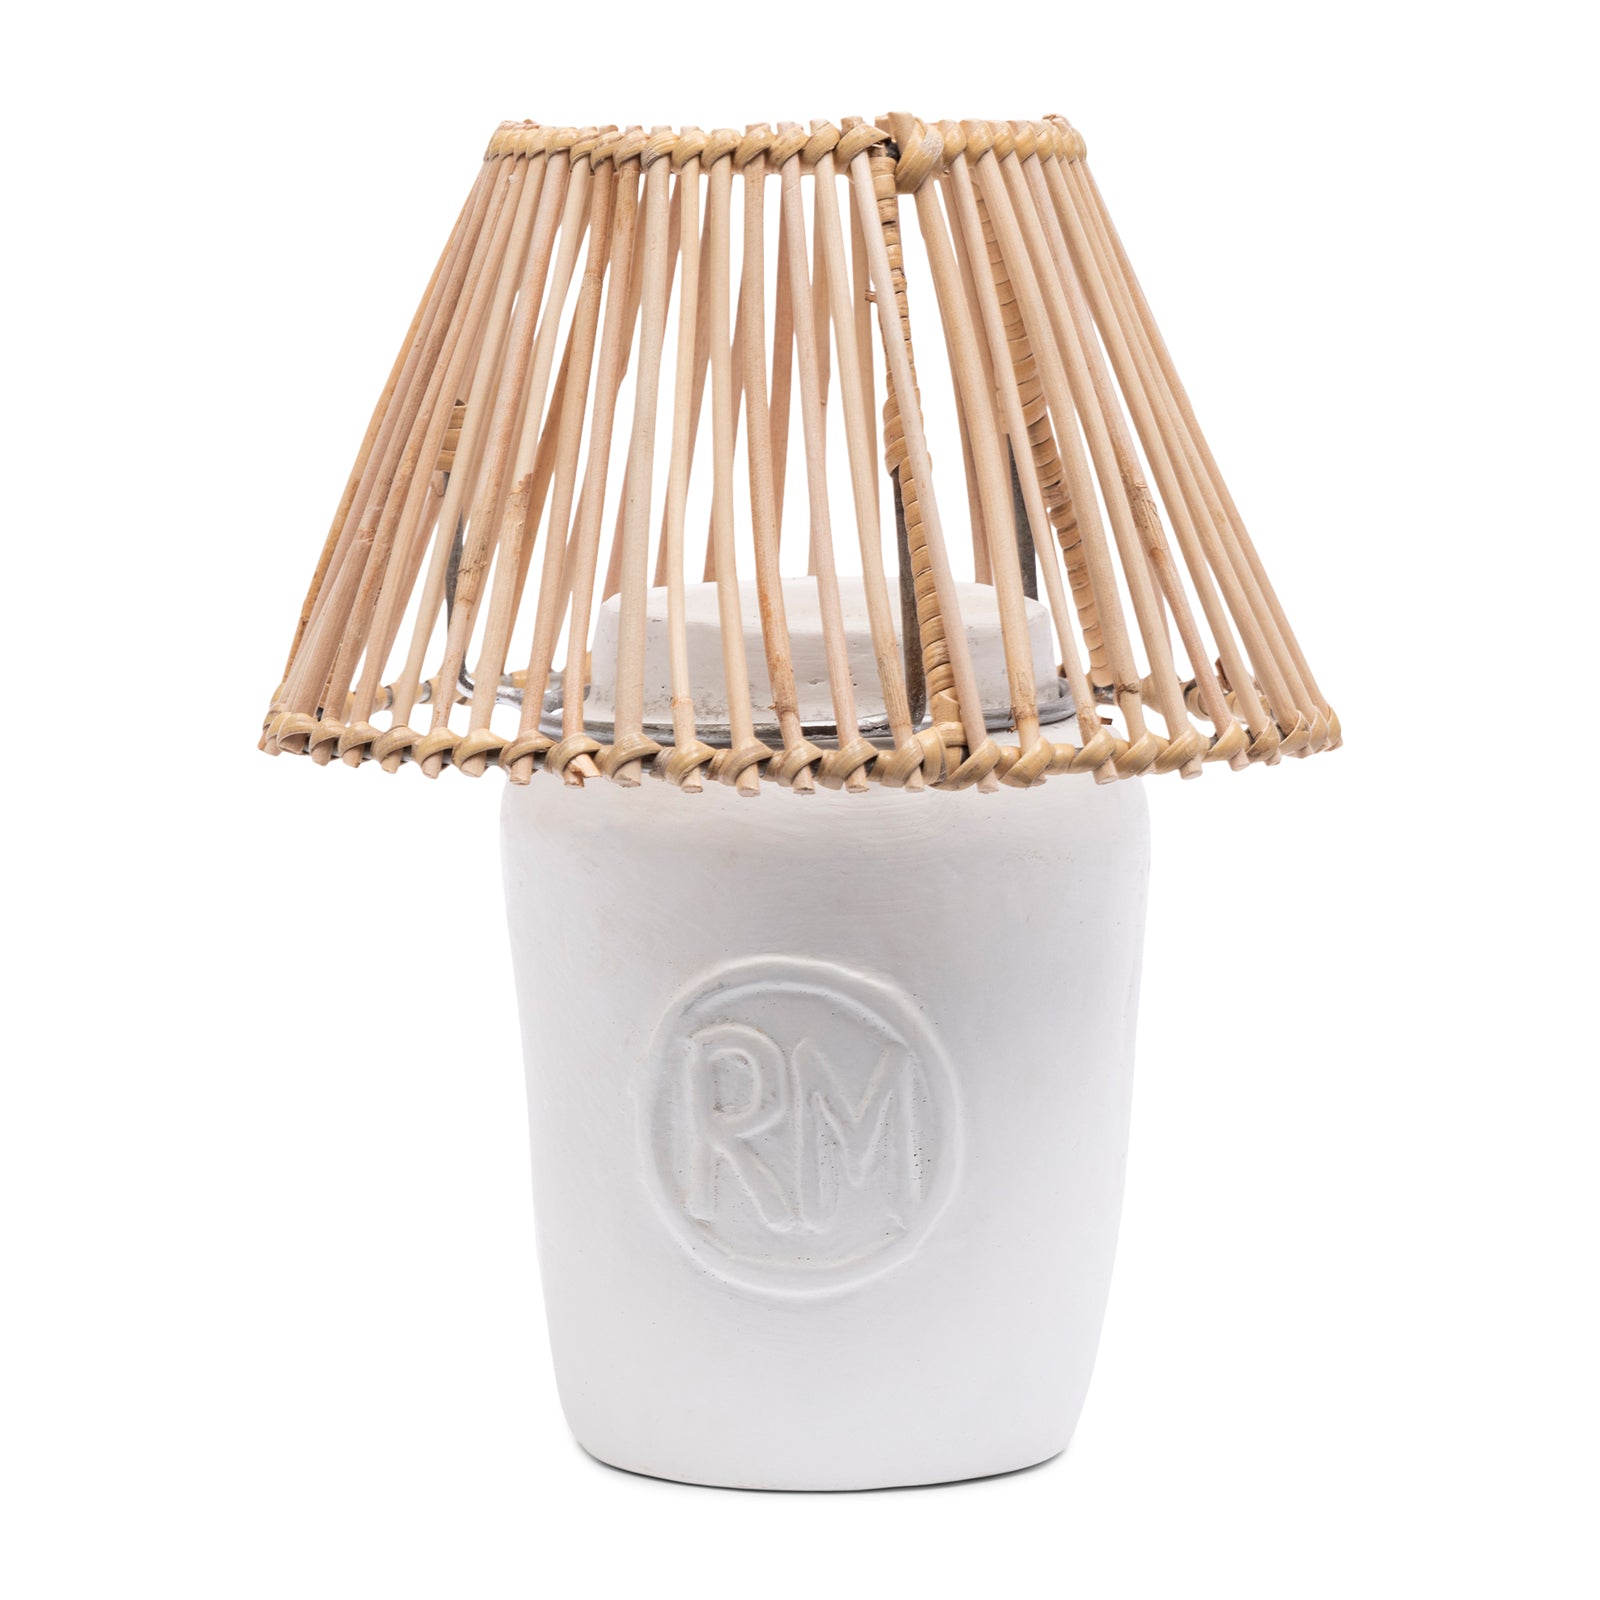 CANDLE HOLDER with a rattan roof by Riviera Maison